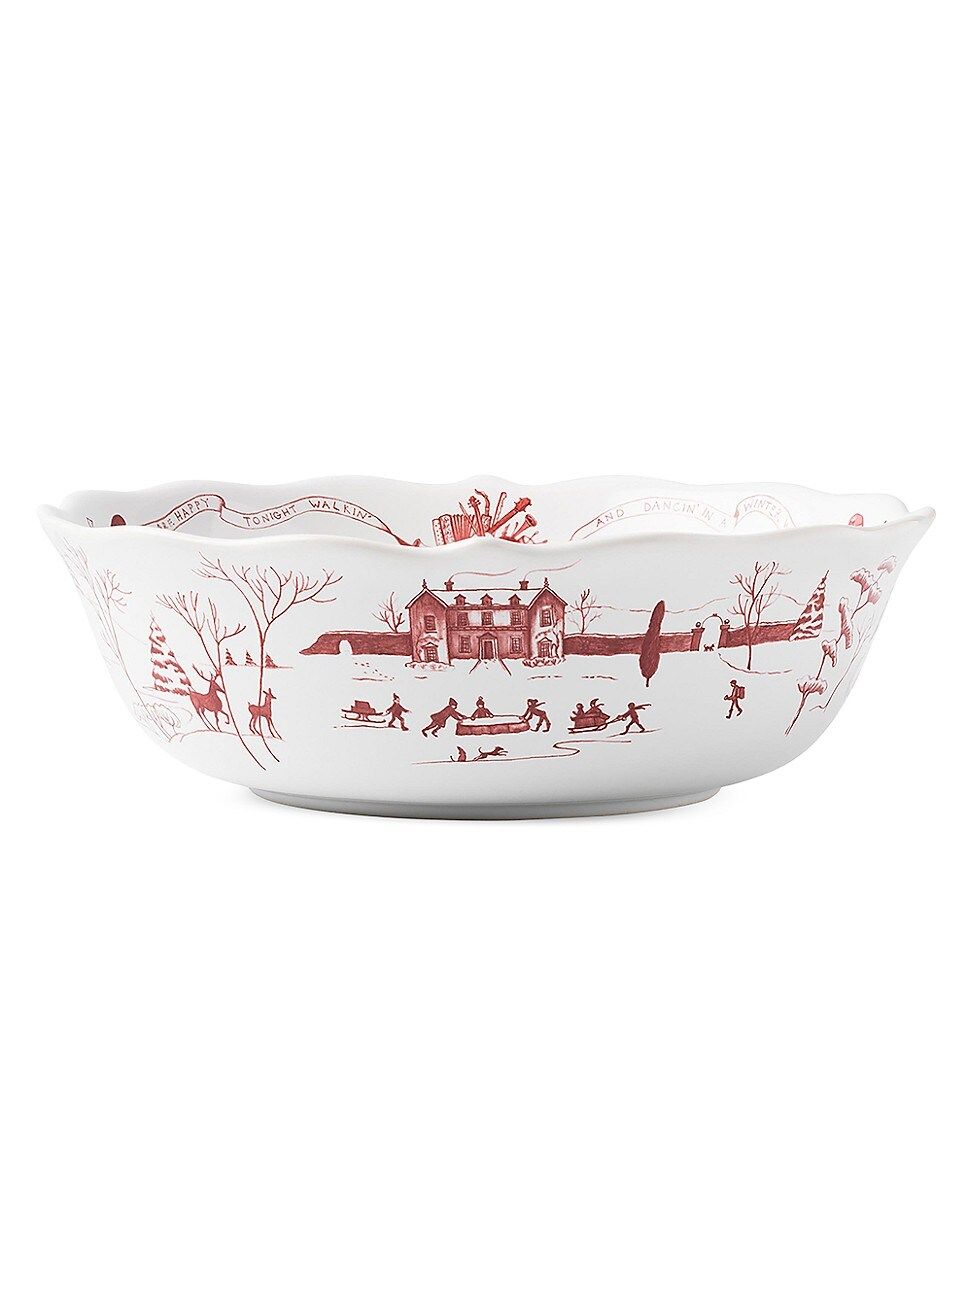 Country Estate Winter Frolic Serving Bowl | Saks Fifth Avenue